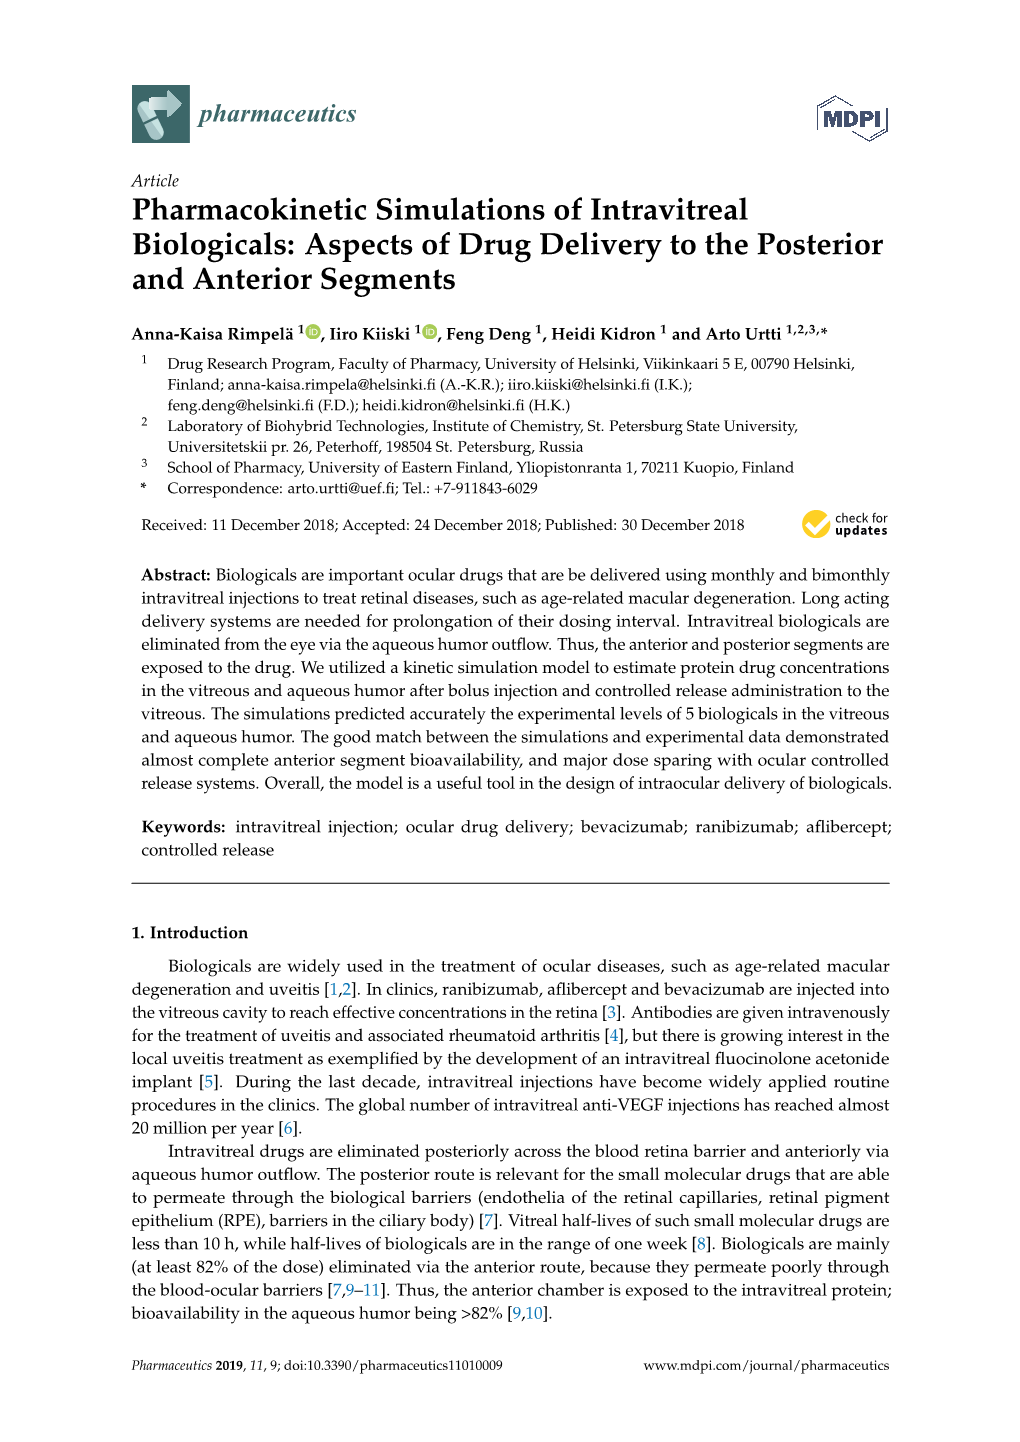 Pharmacokinetic Simulations of Intravitreal Biologicals: Aspects of Drug Delivery to the Posterior and Anterior Segments